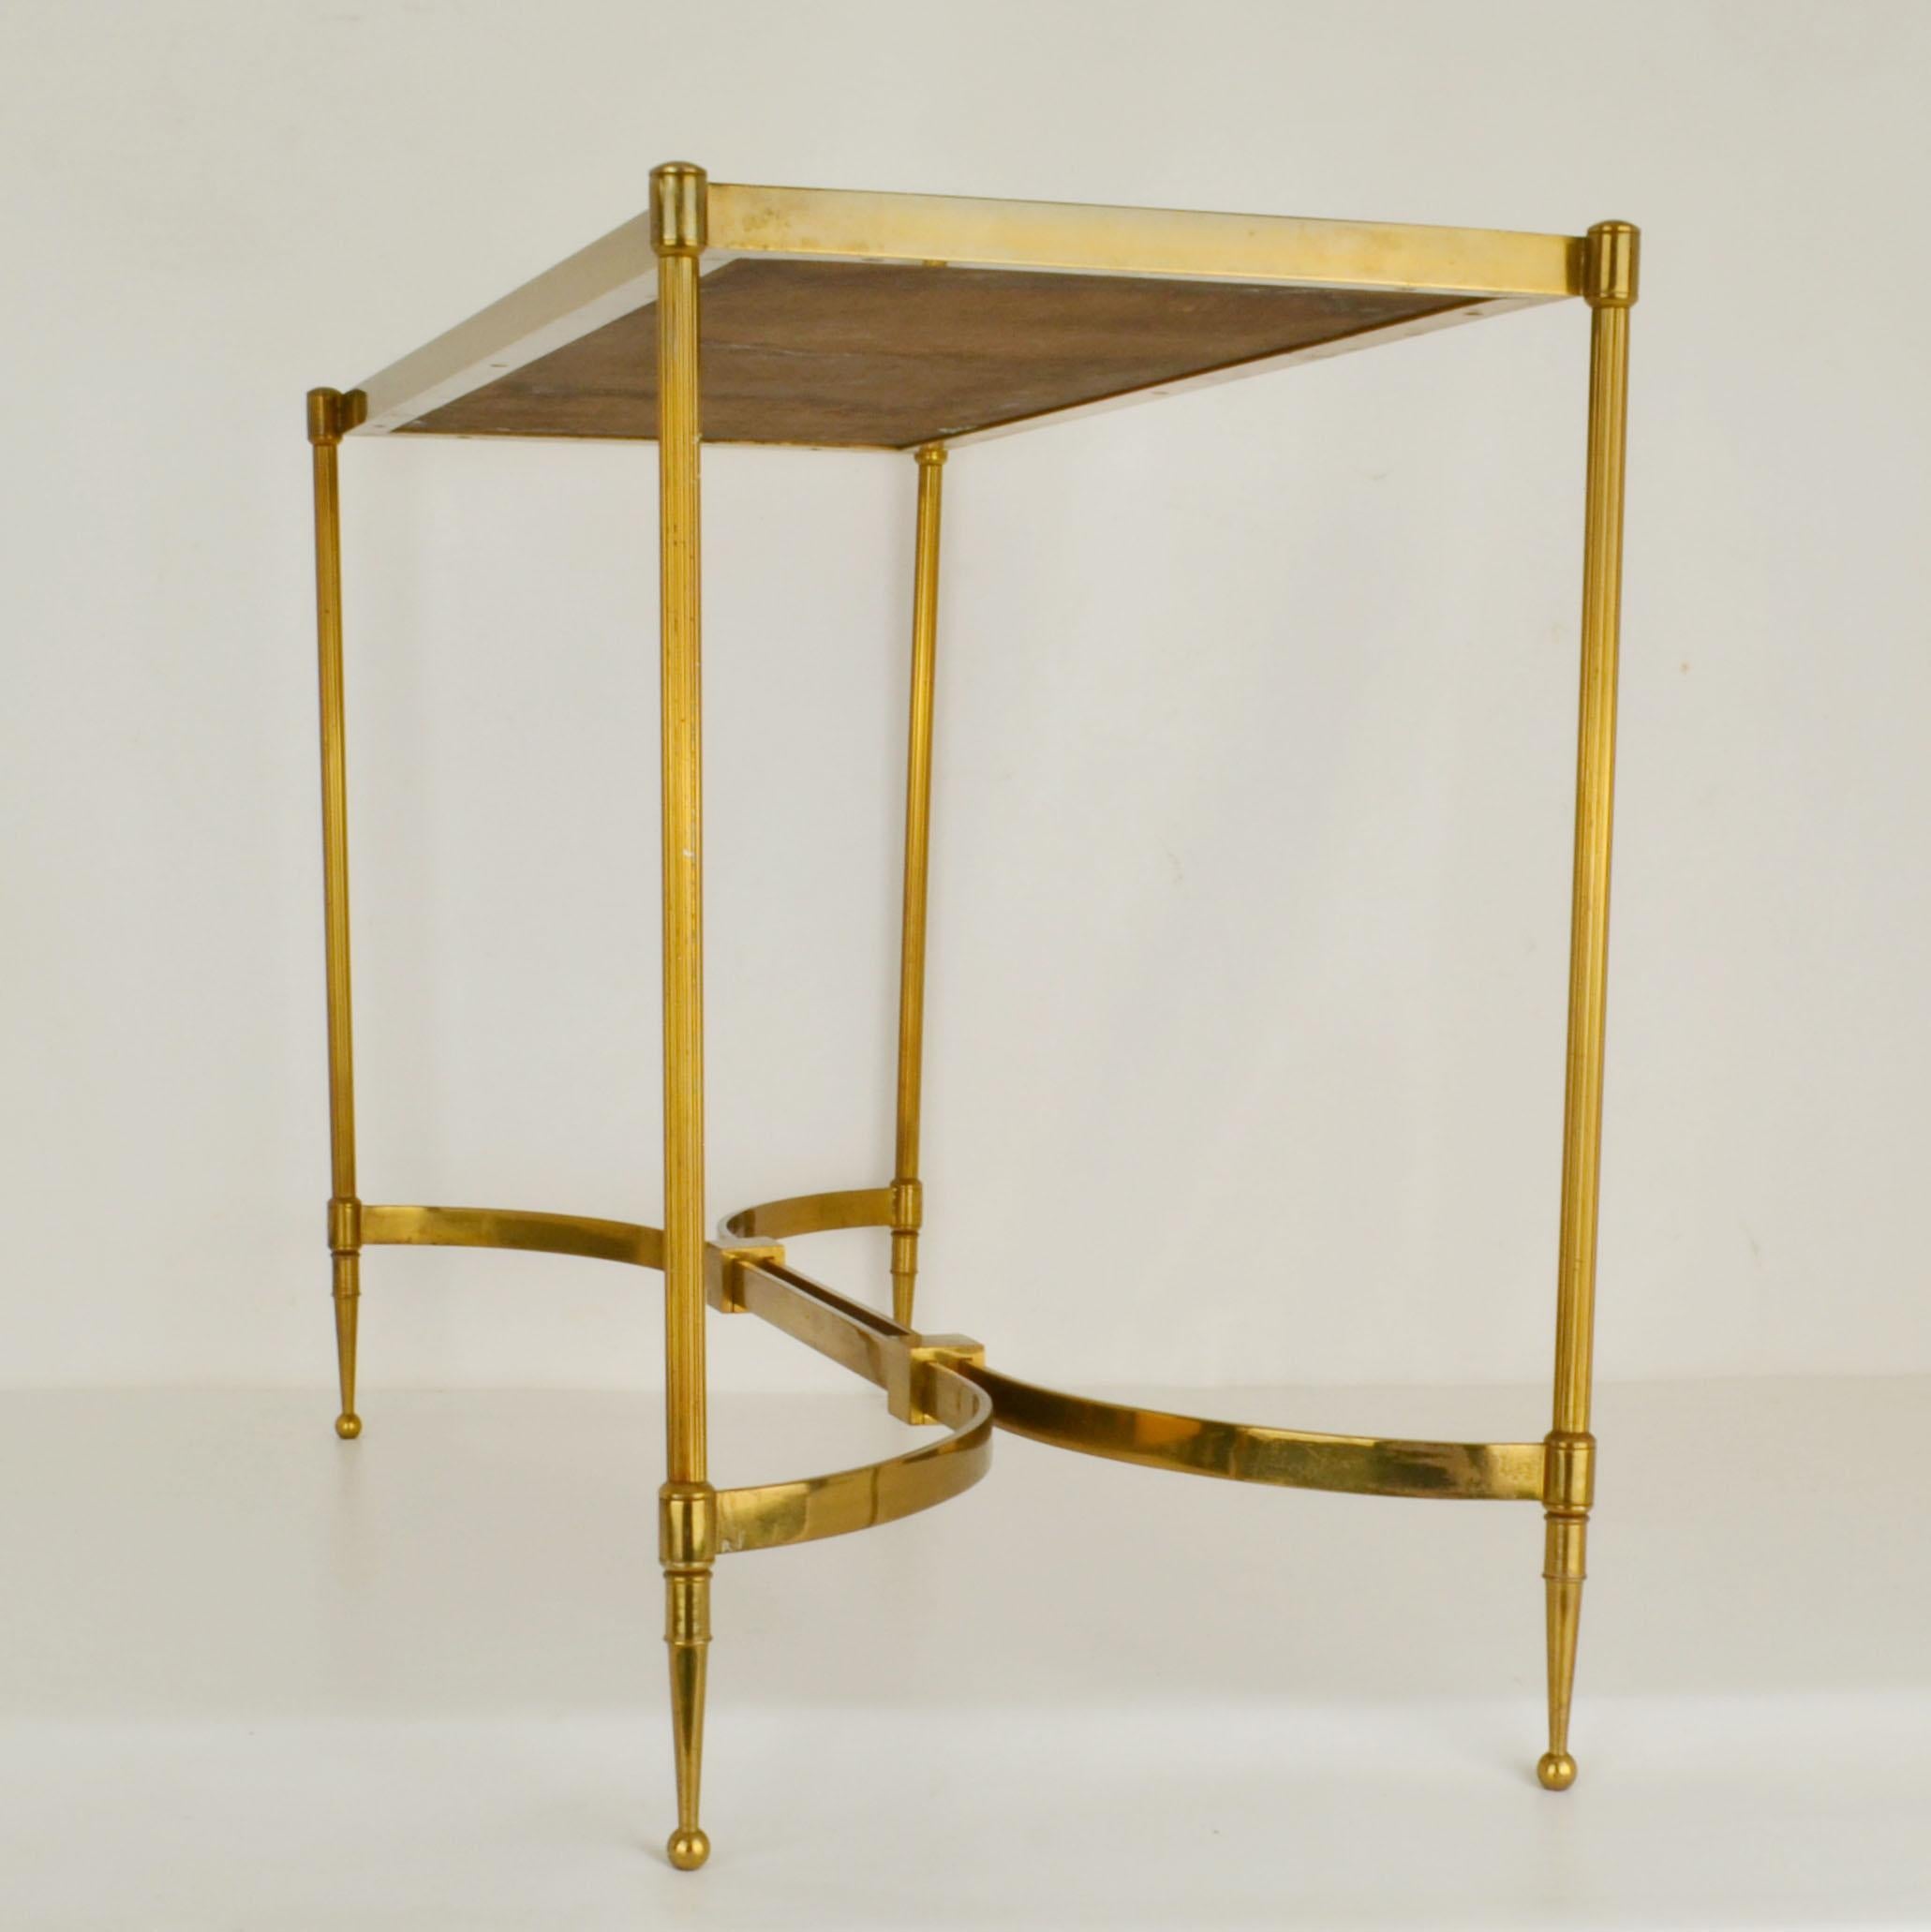 Late 20th Century French Brass Coffee Table with Mirrored Top in Hollywood Regency Style For Sale